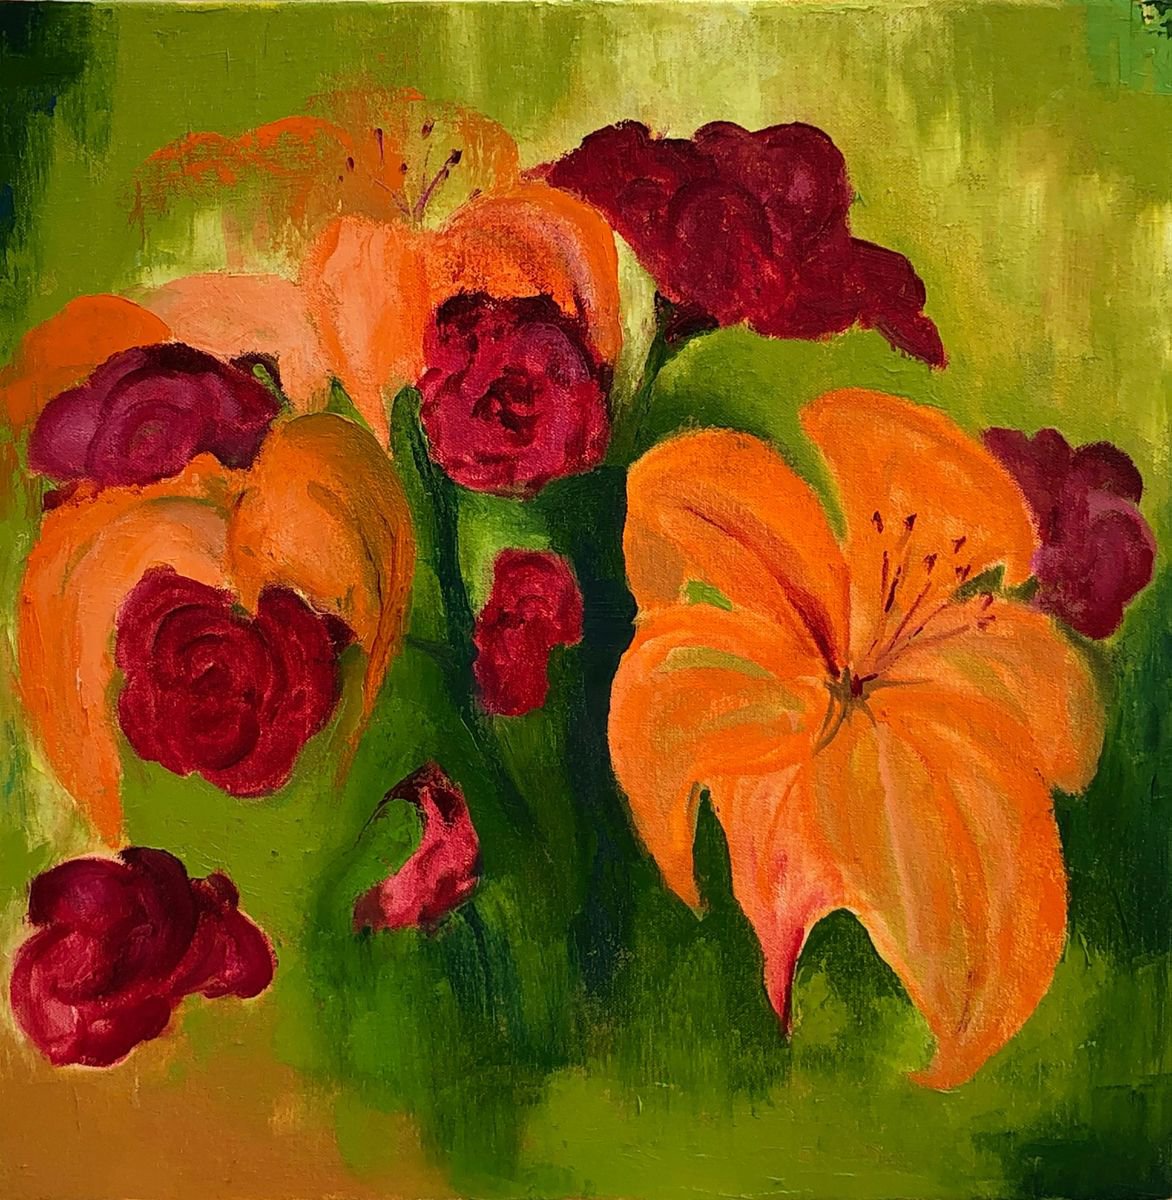 Lilies and Carnations by Ann Palmer